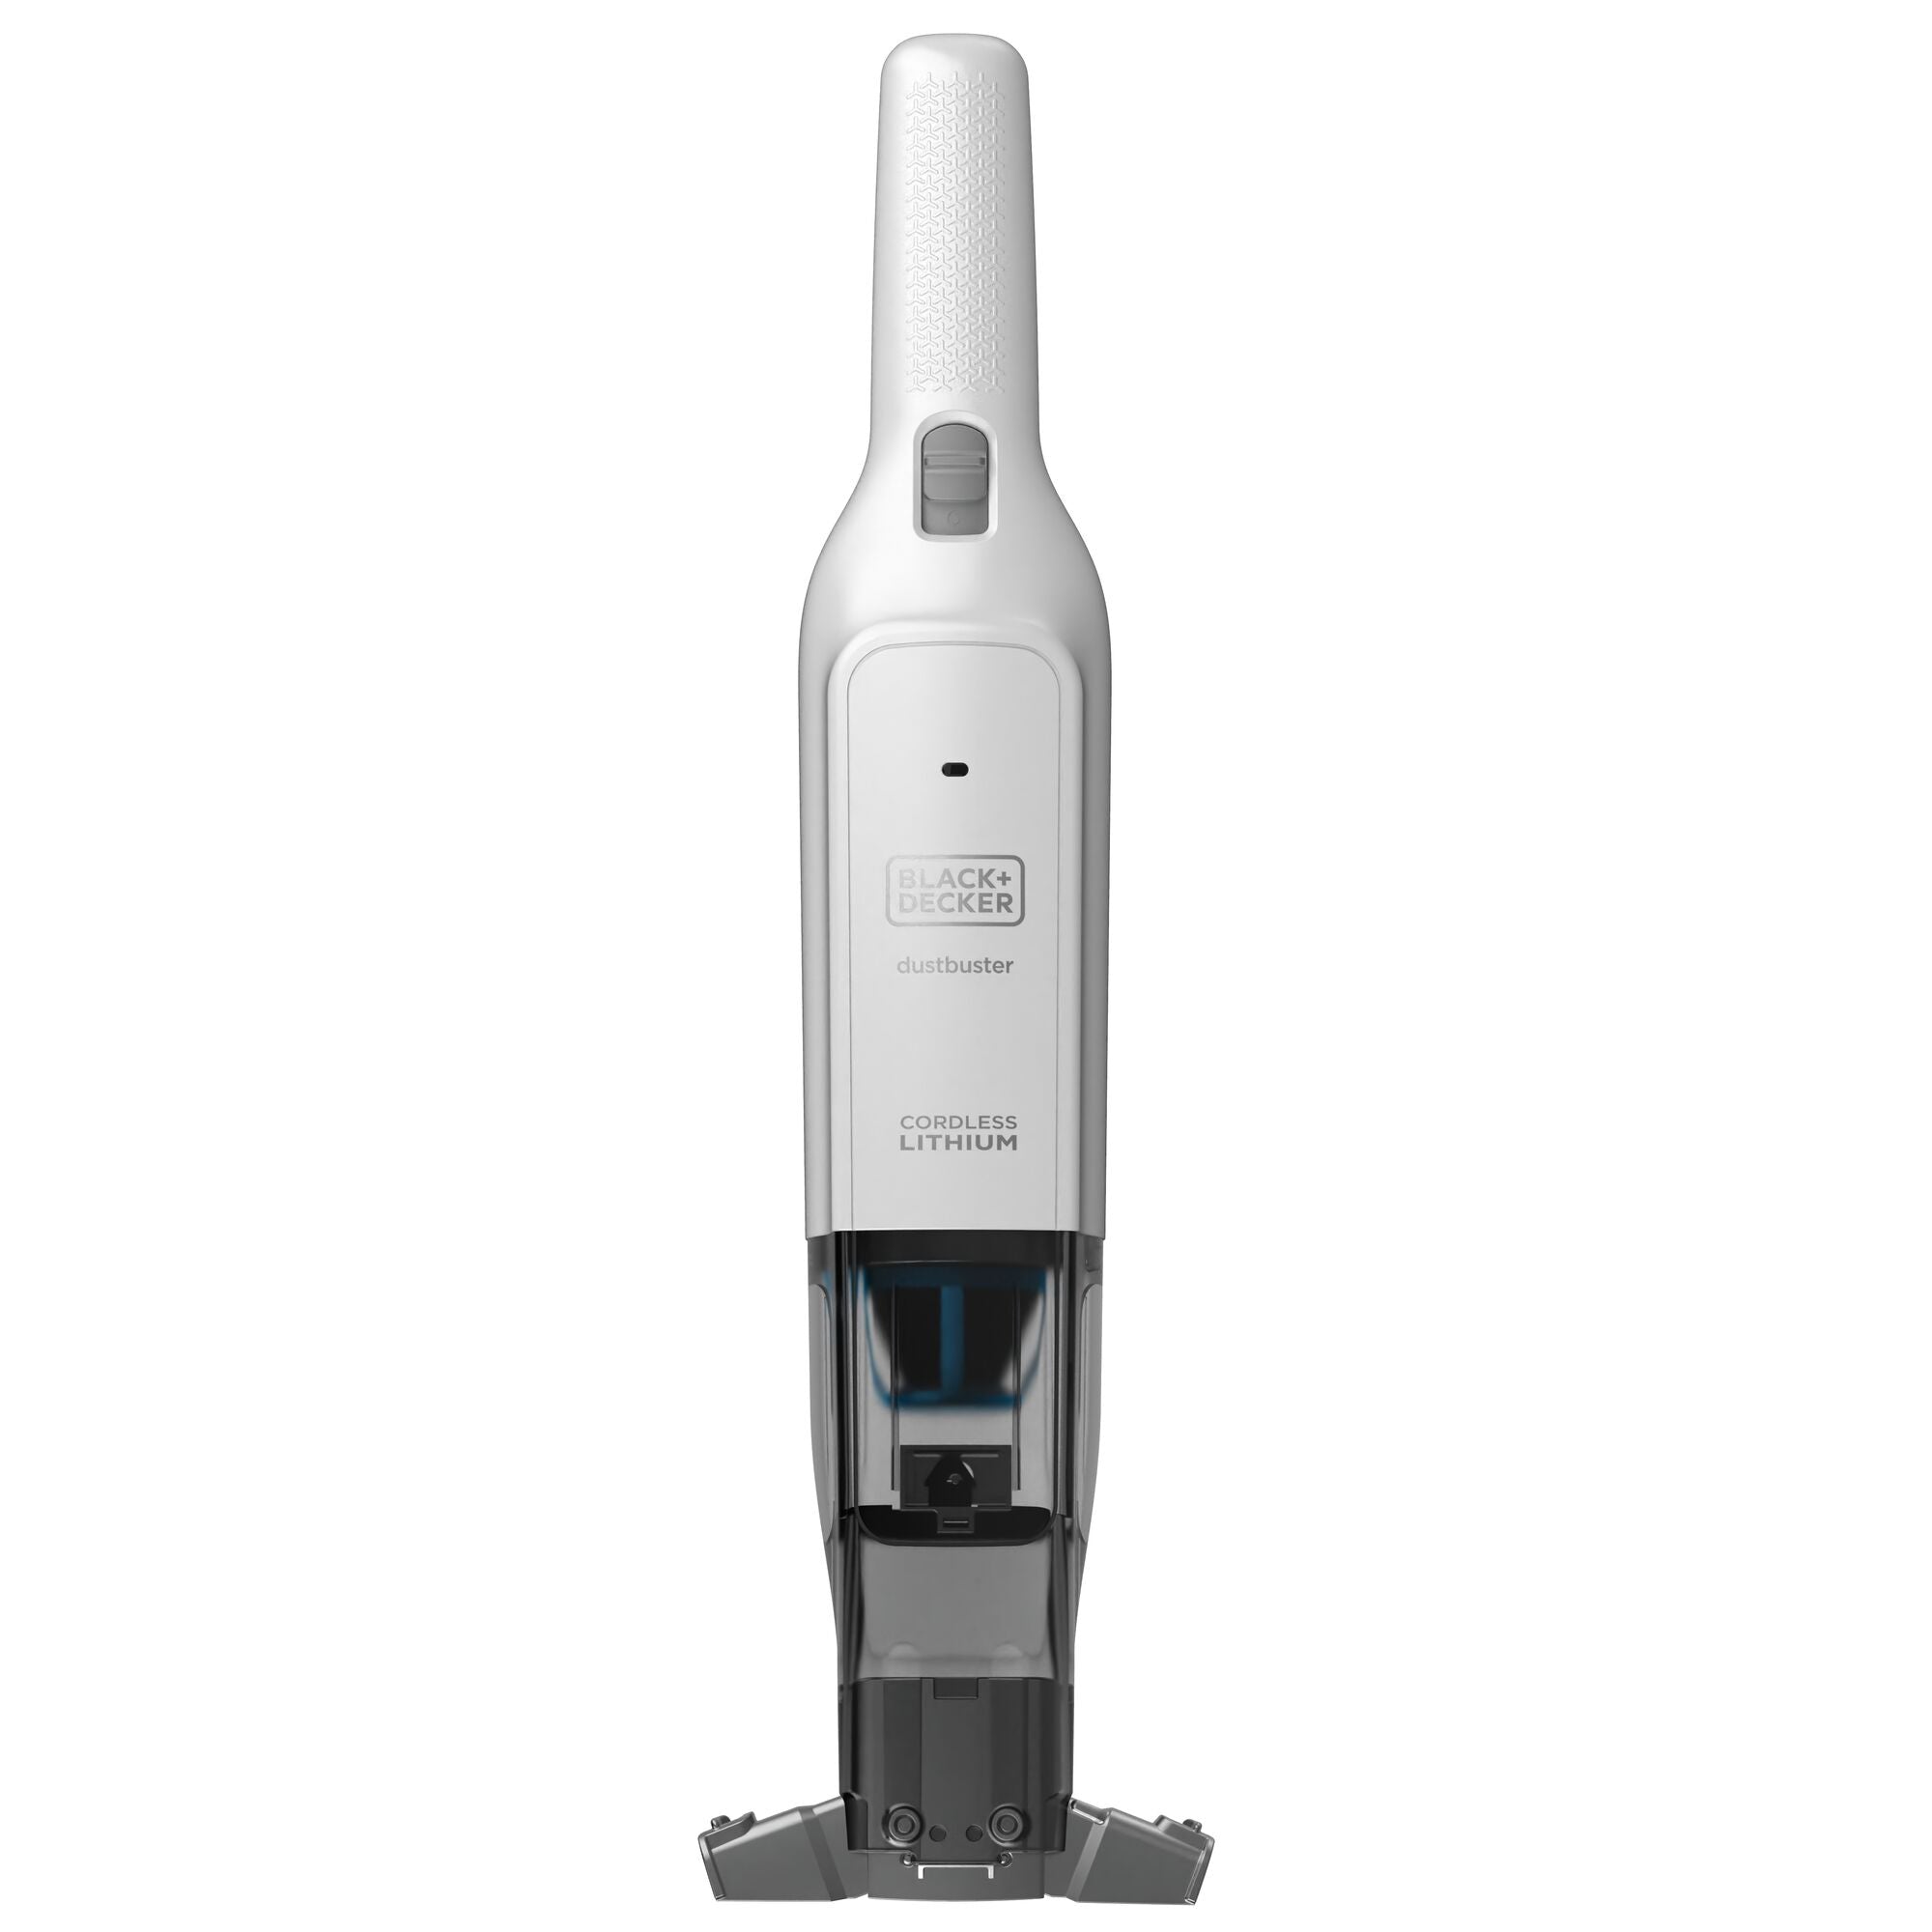 BLACK+DECKER Dustbuster 12-Volt MAX Bagless Cordless Washable Filter  Multisurface Handheld Vacuum in Gray HLVC315B01 - The Home Depot